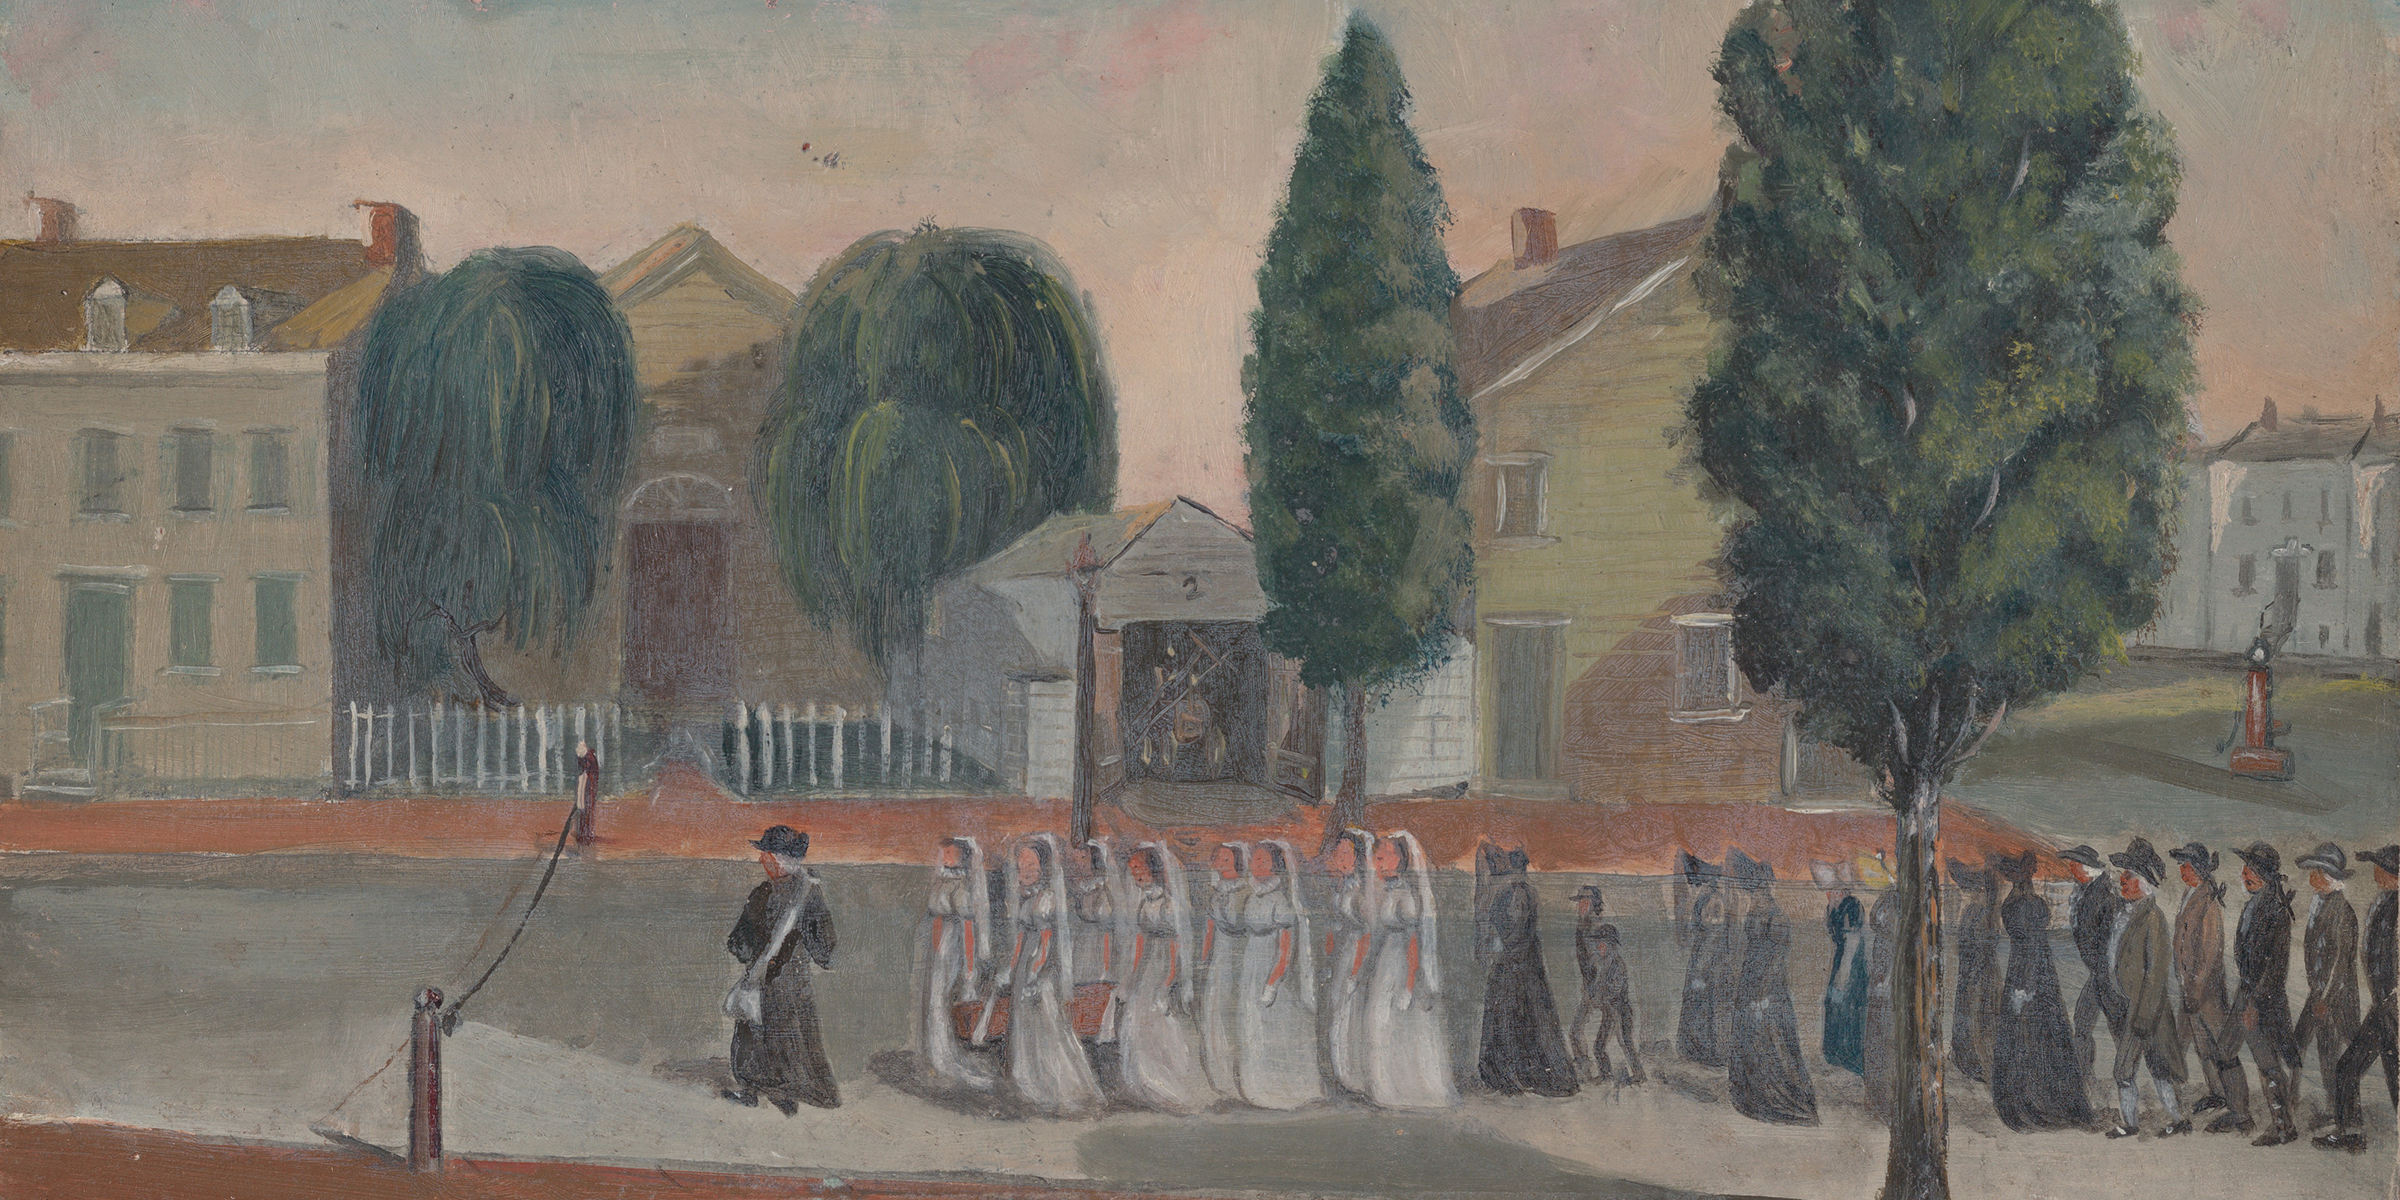 Infant Funeral Procession, by William P. Chappel, c. 1870